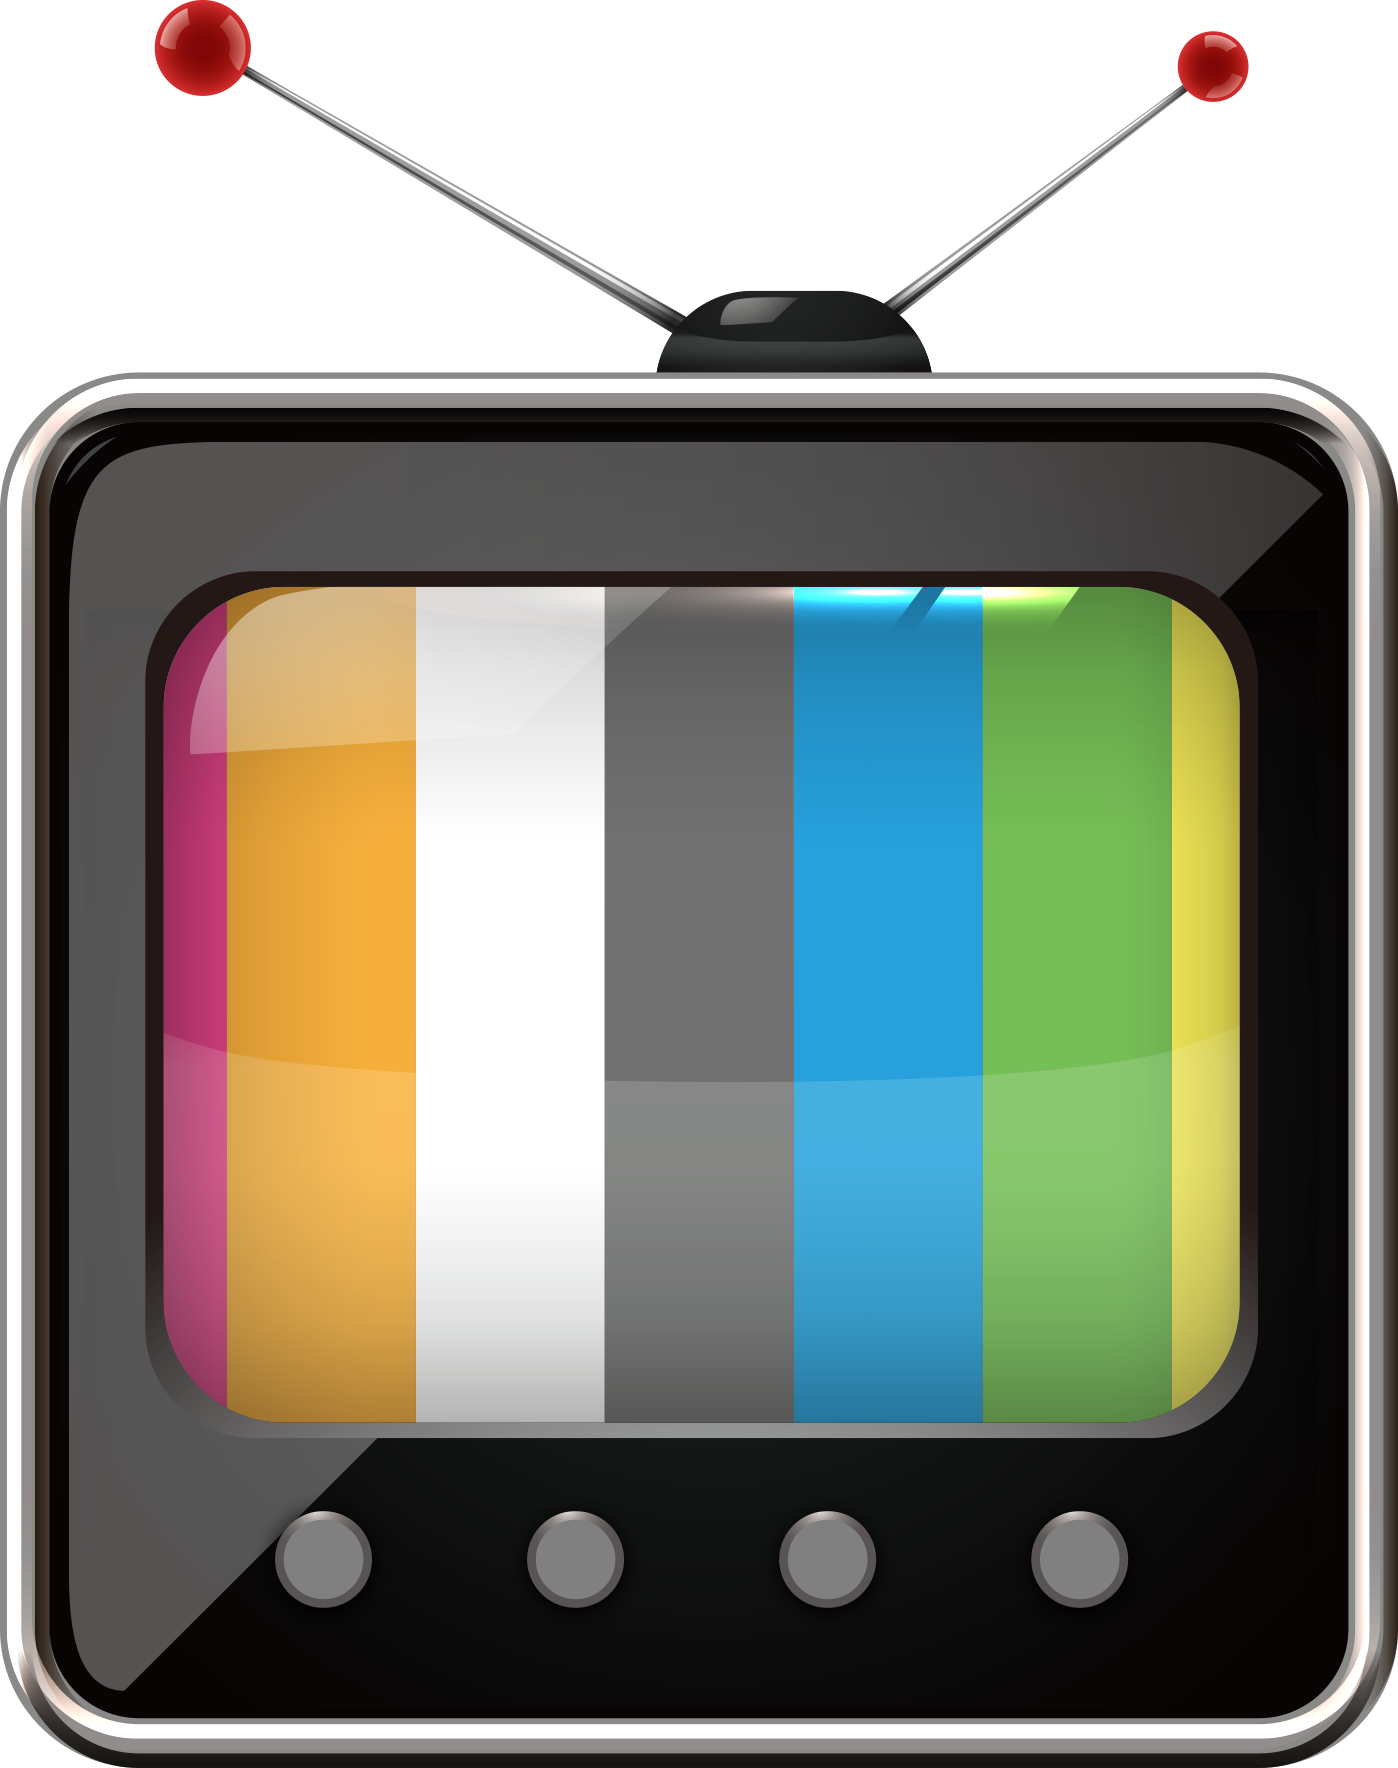 Free Tv Clipart square, Download Free Clip Art on Owips